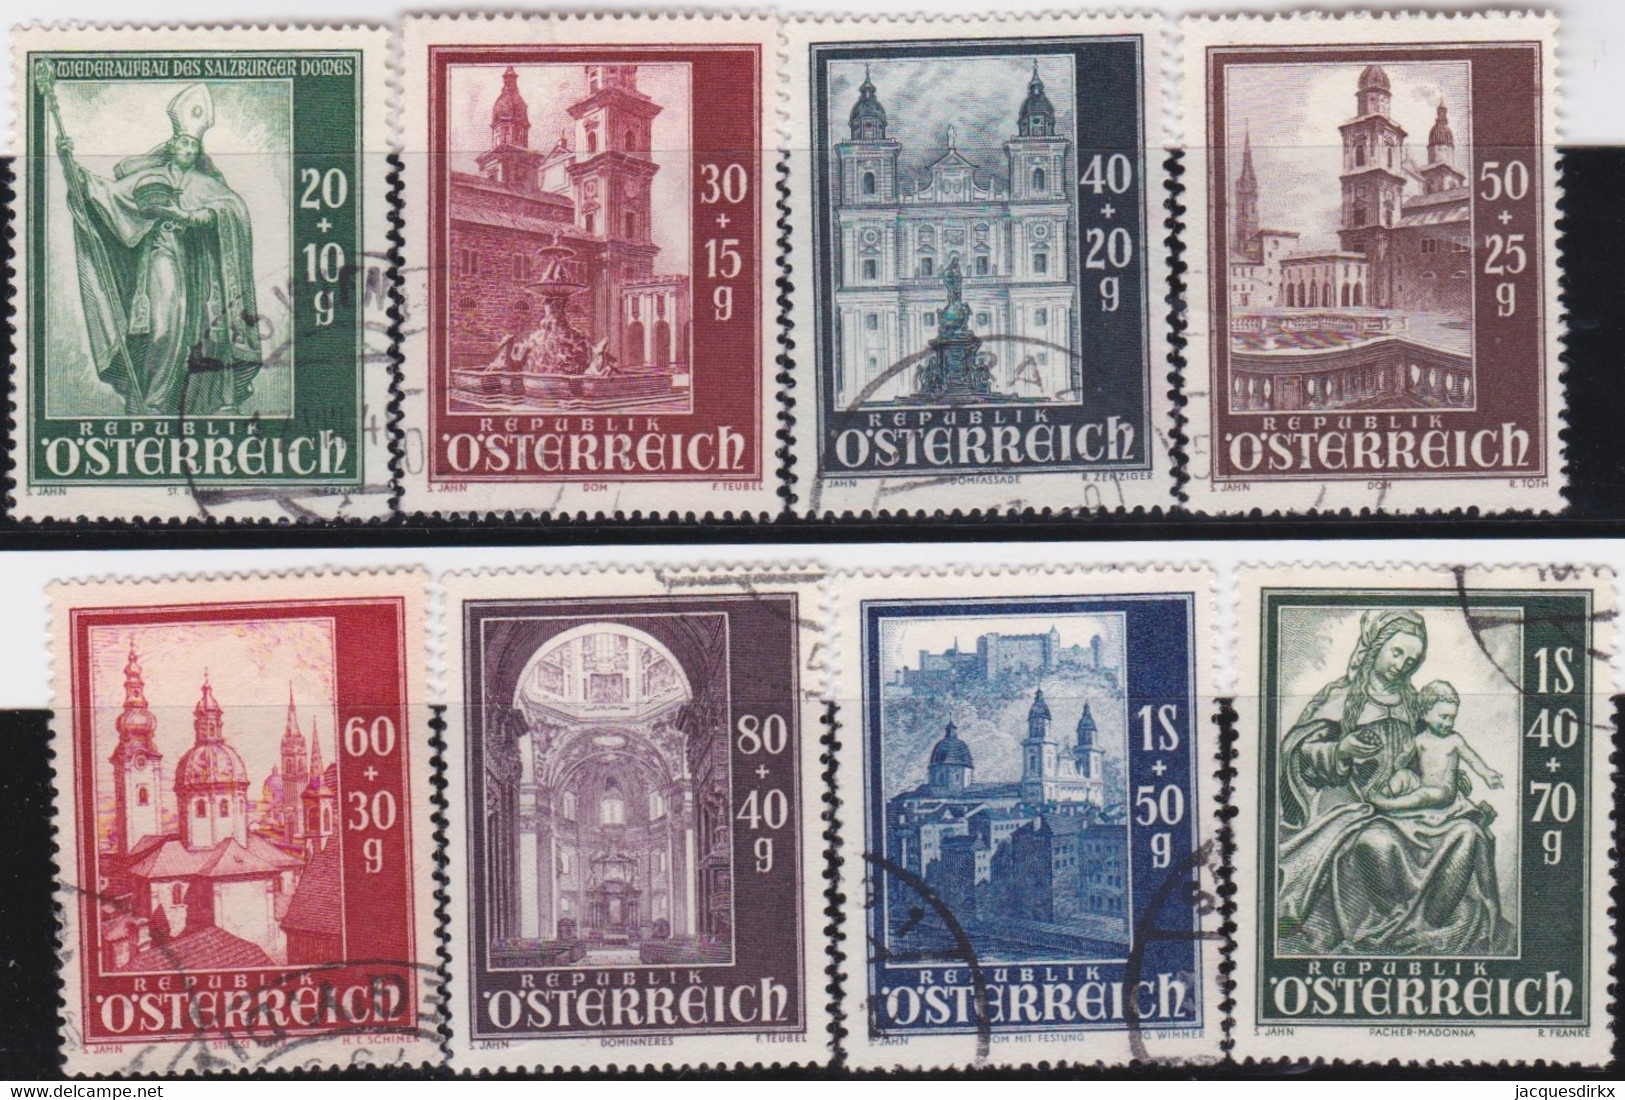 Österreich   .   Y&T    .    755/762     .     O  .     Gebraucht  .   /    .  Cancelled - Used Stamps